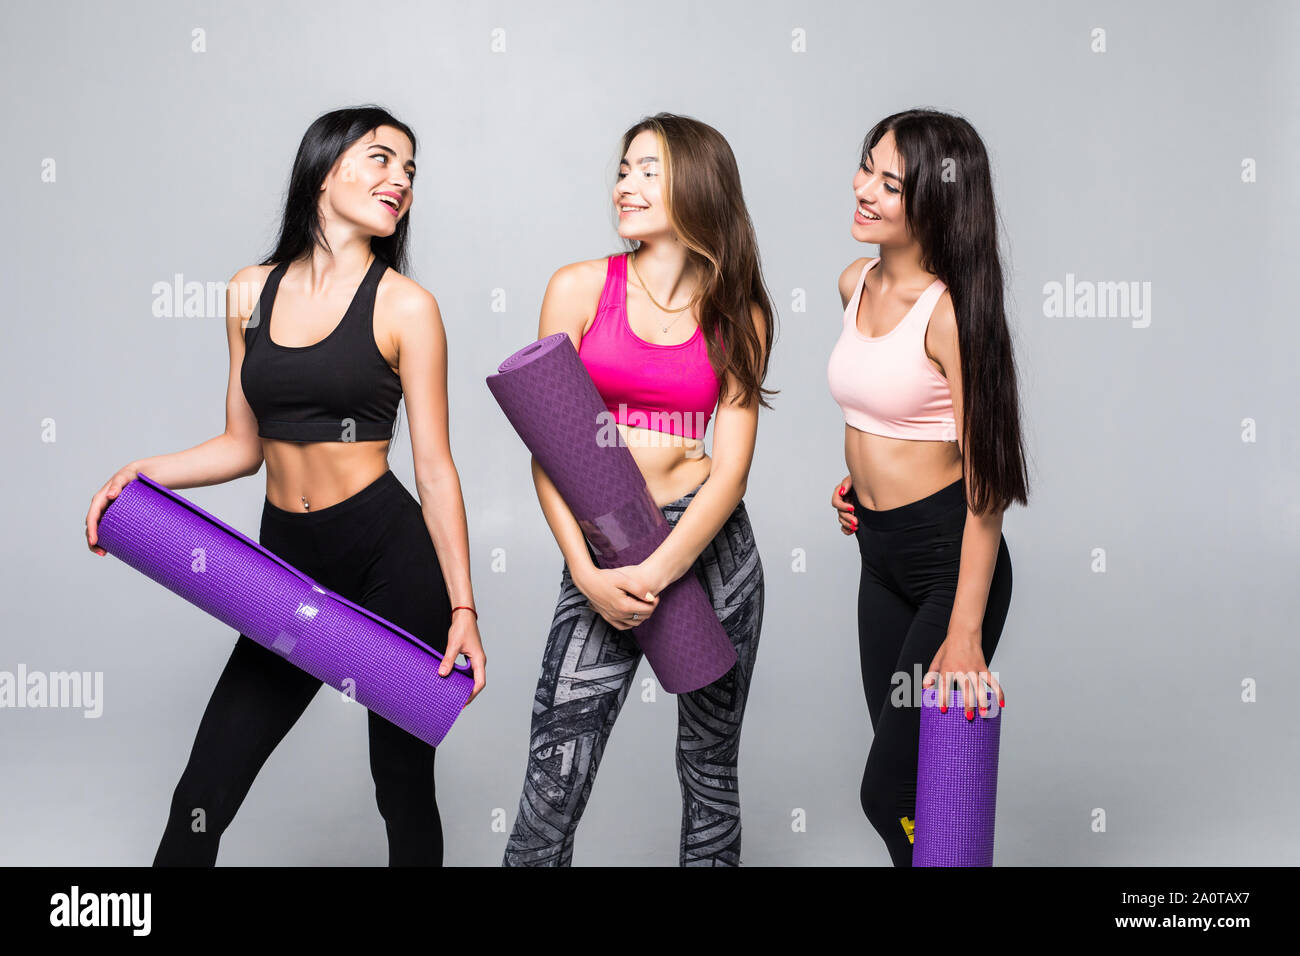 Three fitness young girls in sportswear standing against wall in